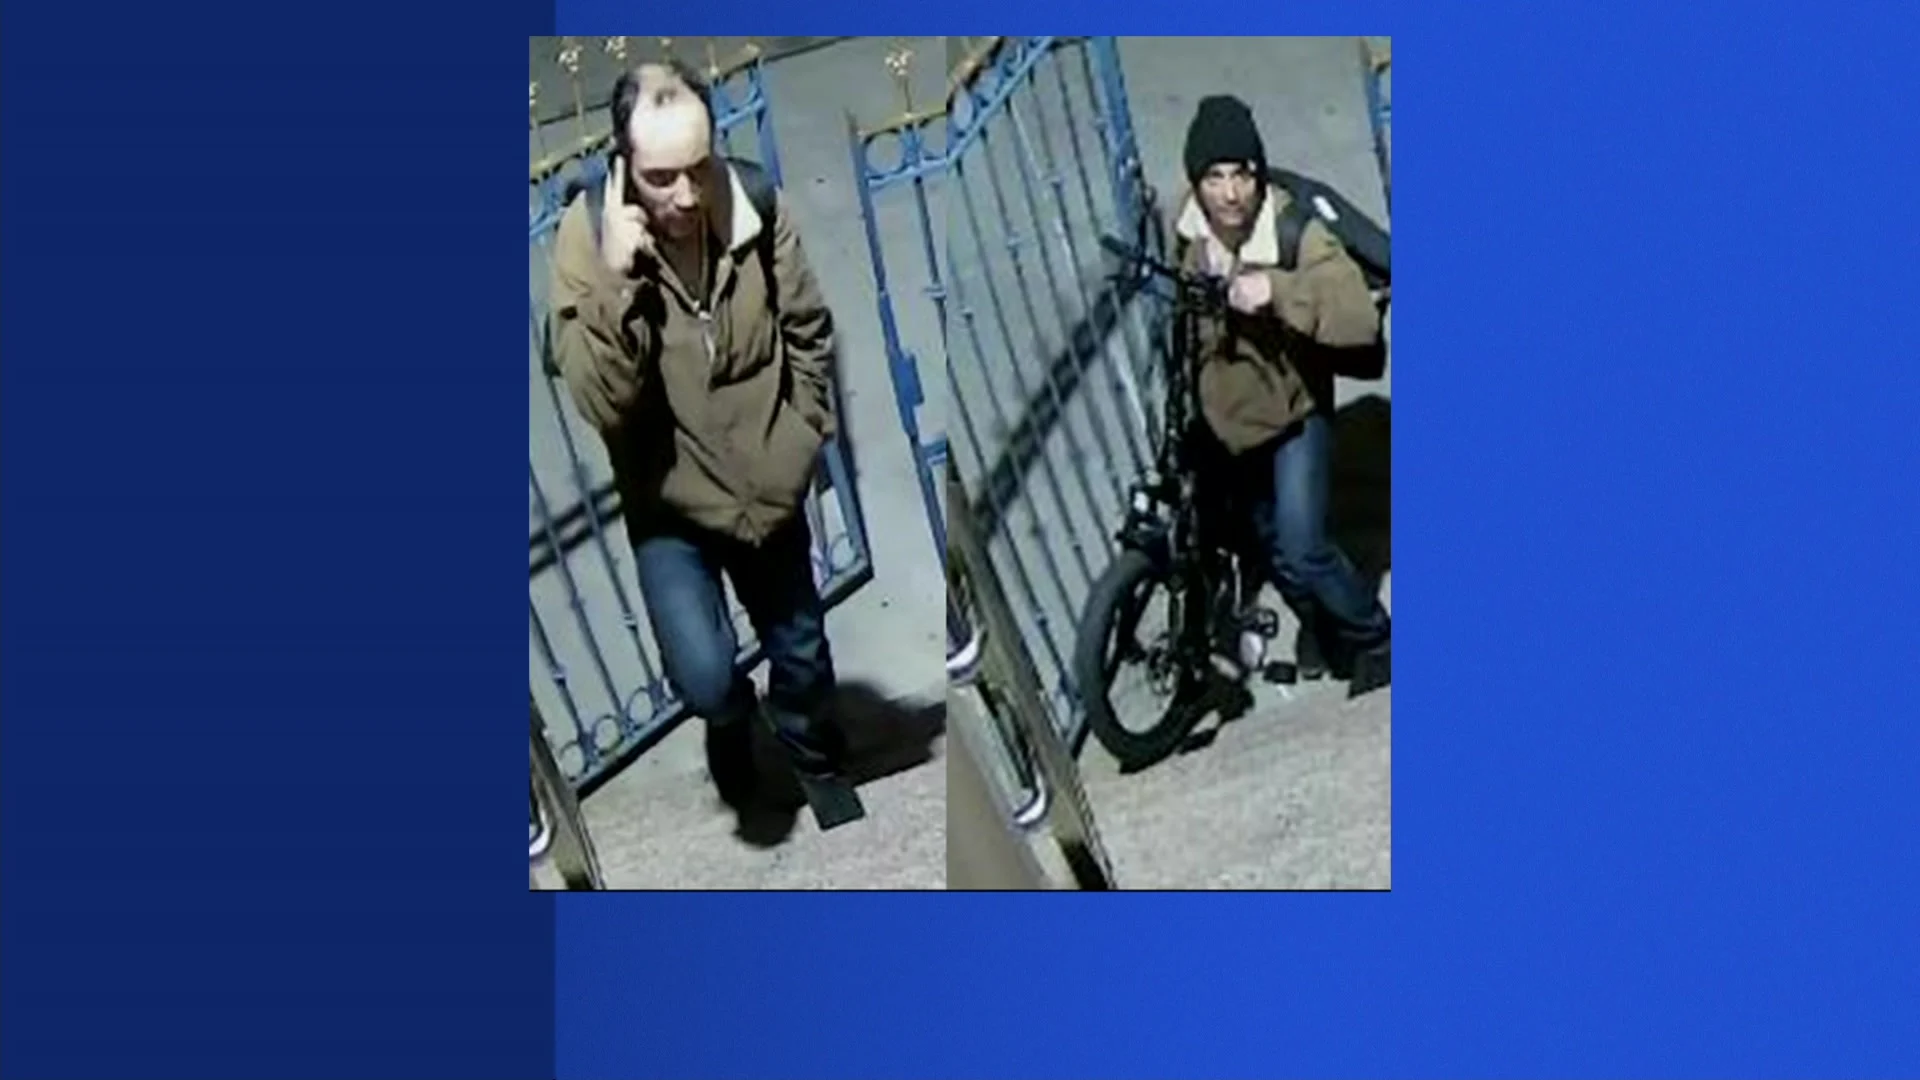 NYPD: Suspect wanted for stealing from donation box at house of worship in Crown Heights